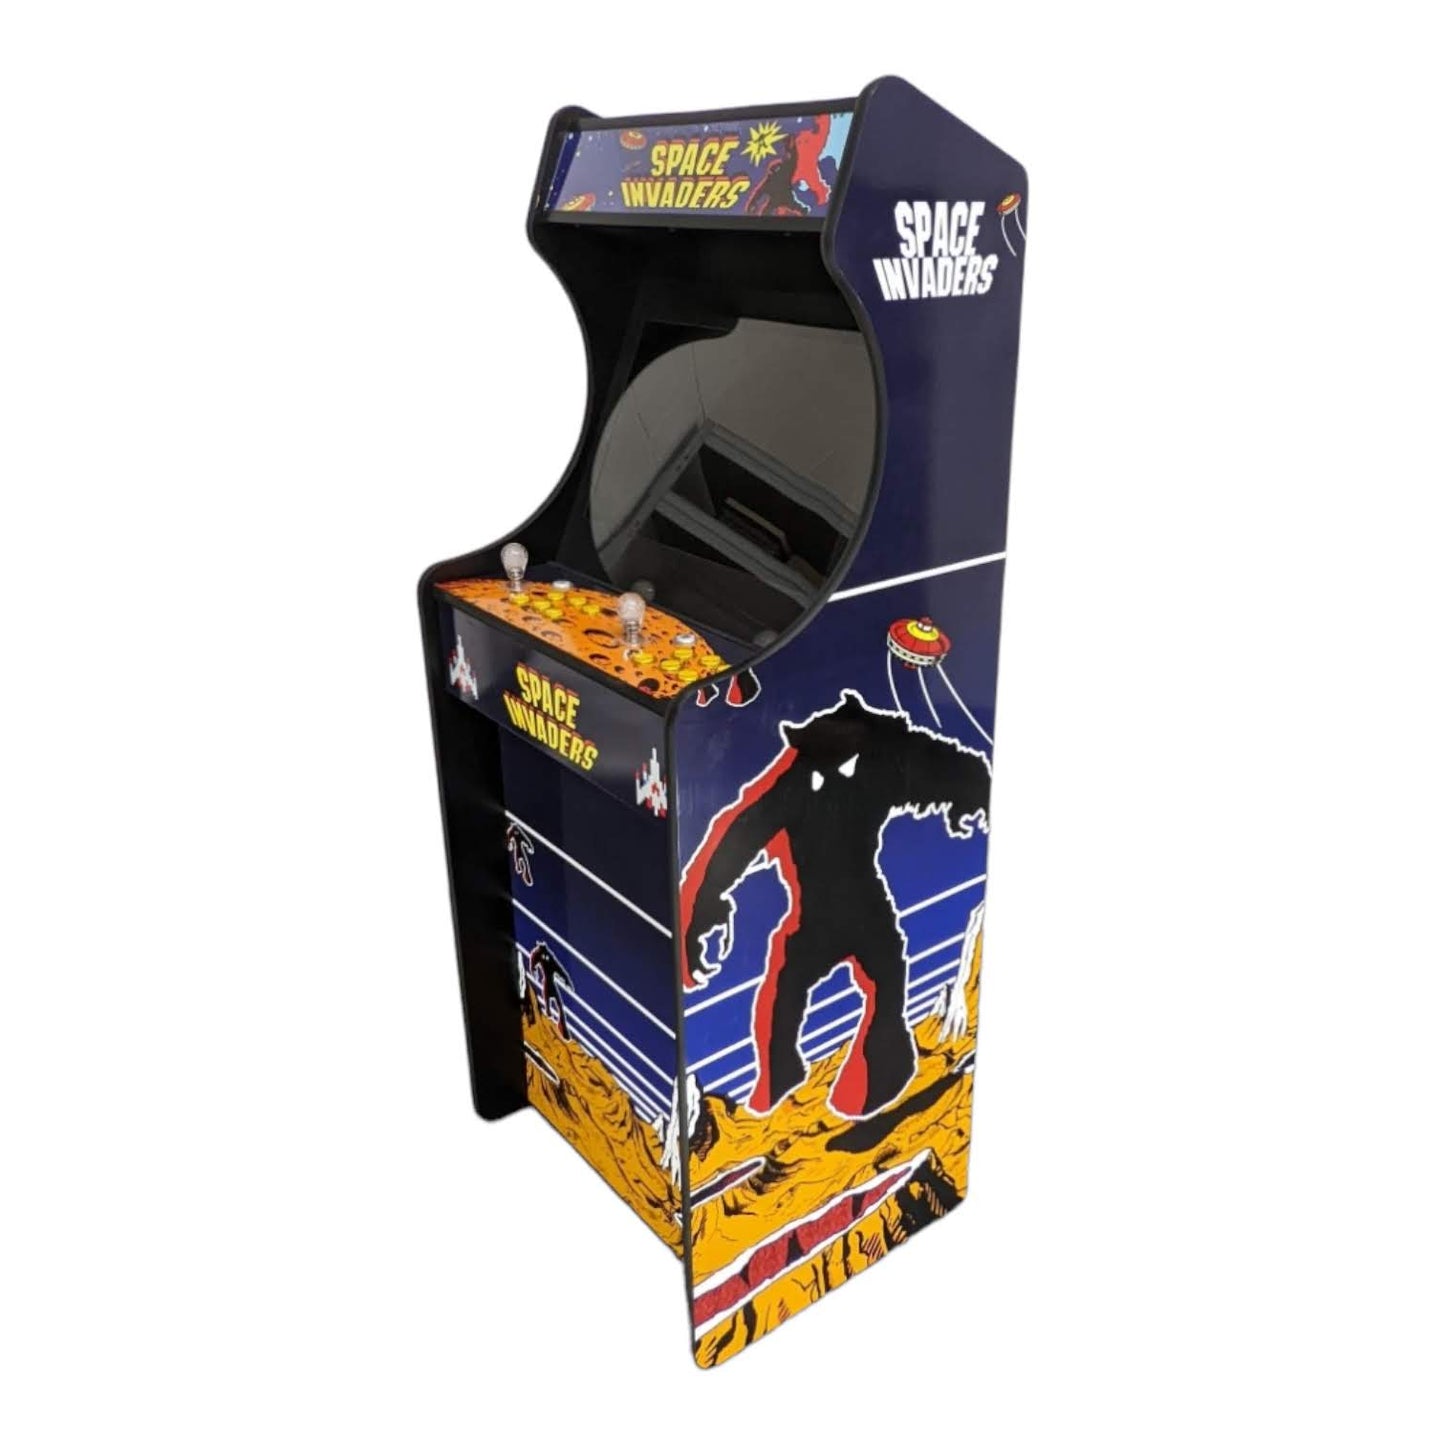 Deluxe 24 Arcade Machine - Space Invaders Theme